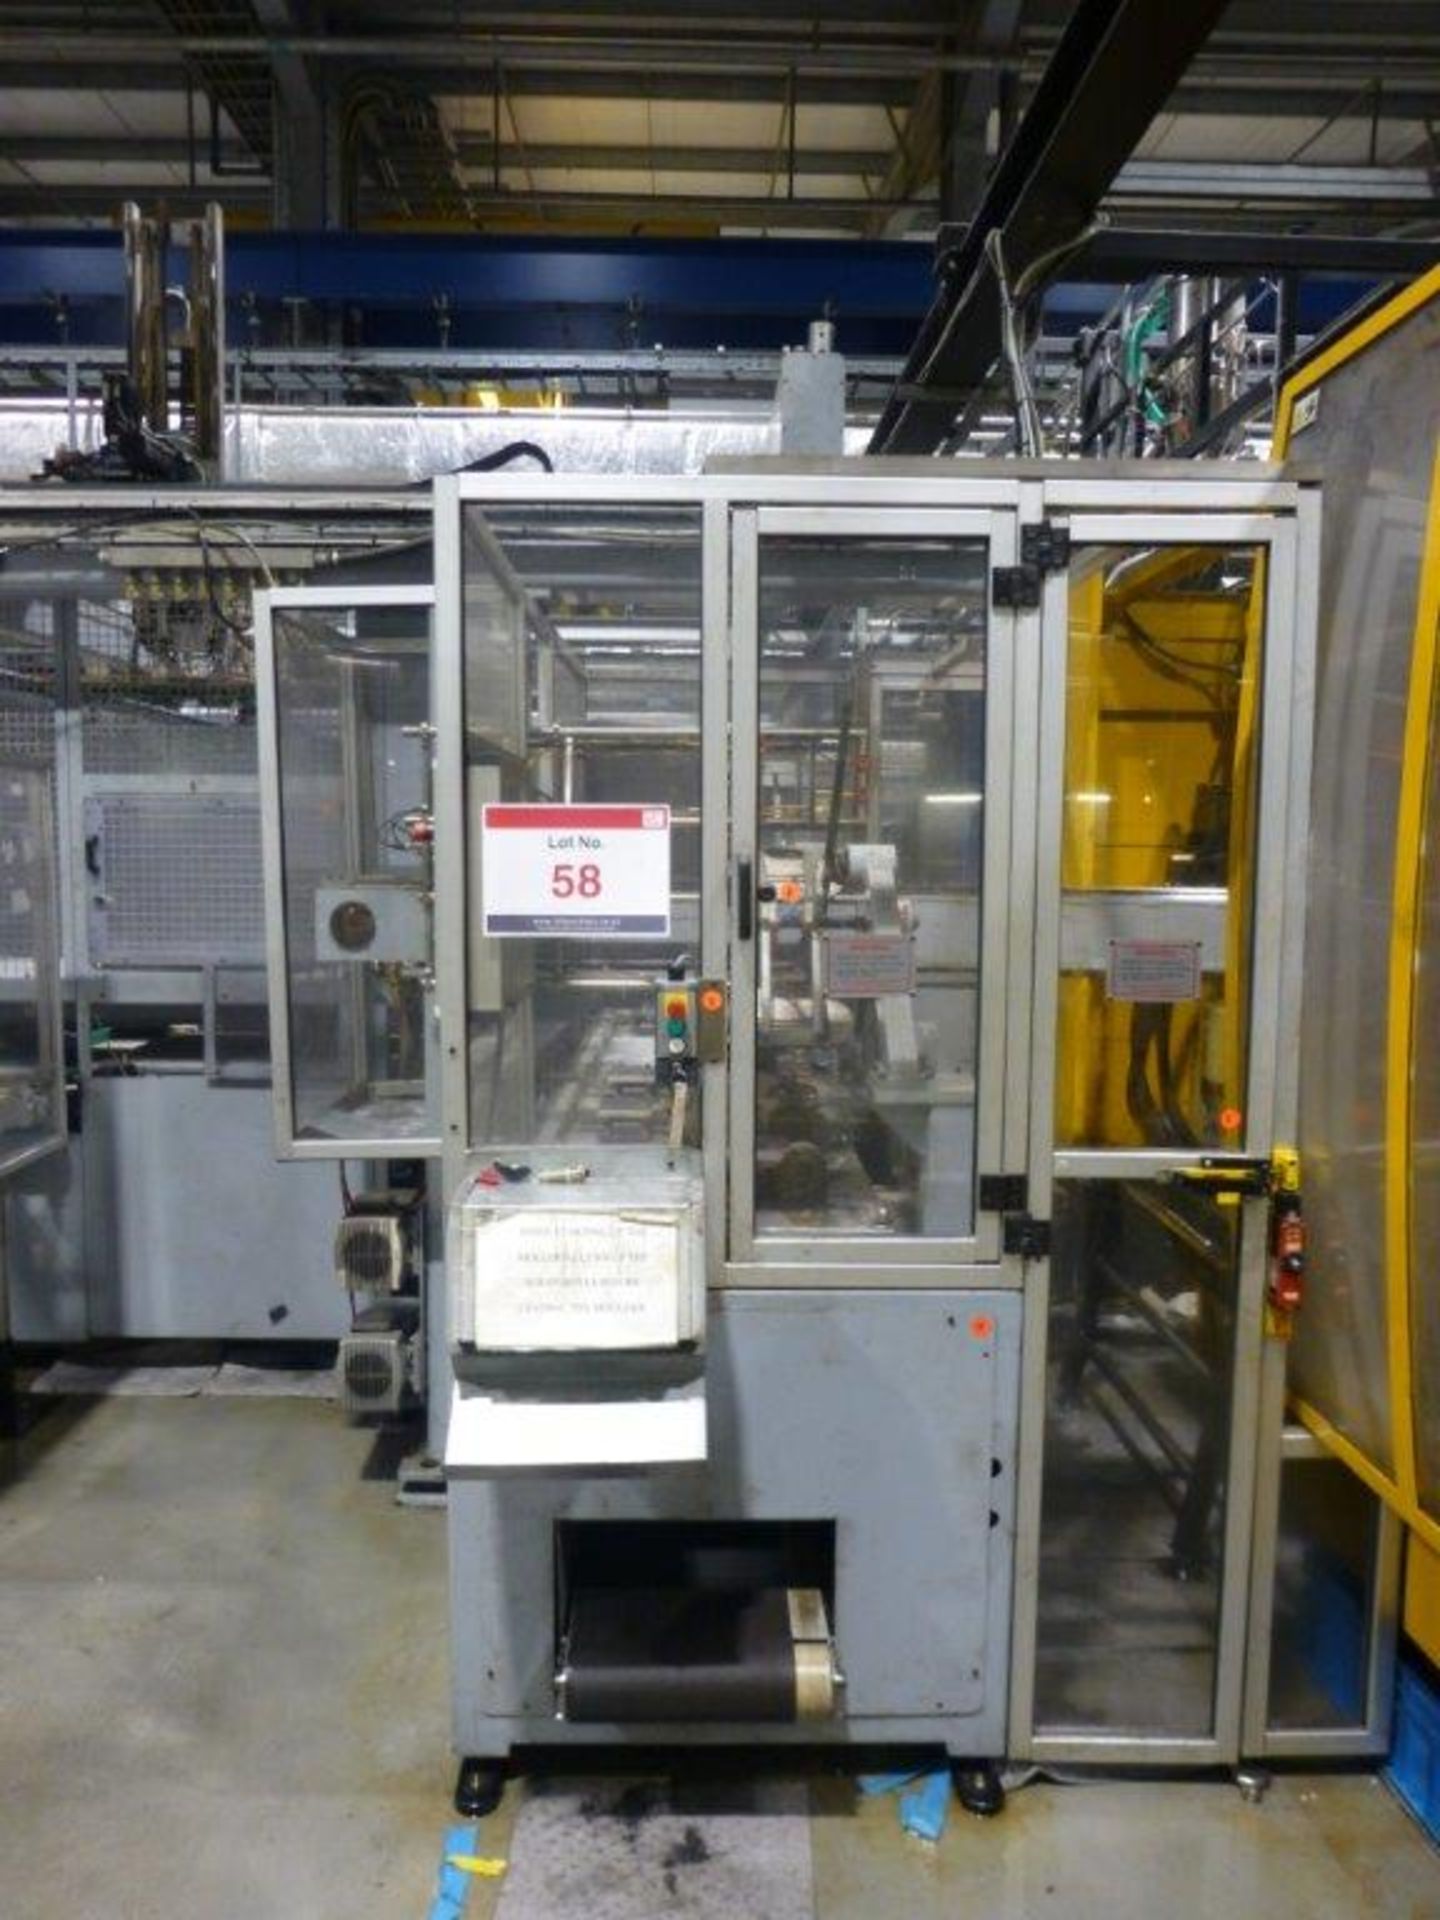 GMAT Model M85 CNC Traversing Pick & Place Robot, serial No. P113 Year of Manufacture 2003 with twin